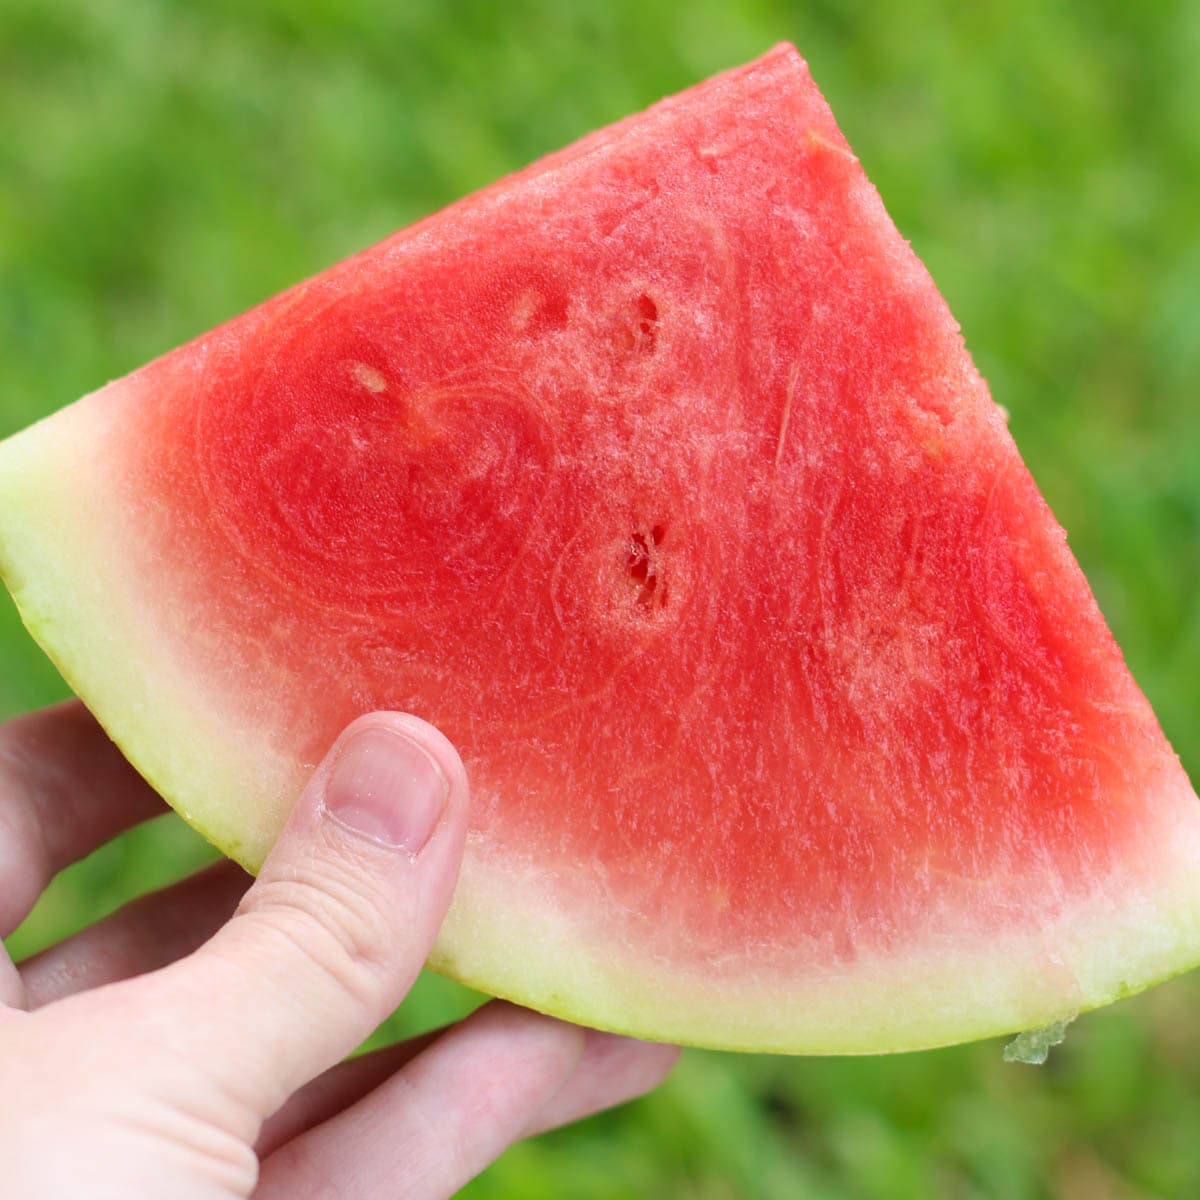 5 Quick Tips: How to Tell If Watermelon is Bad